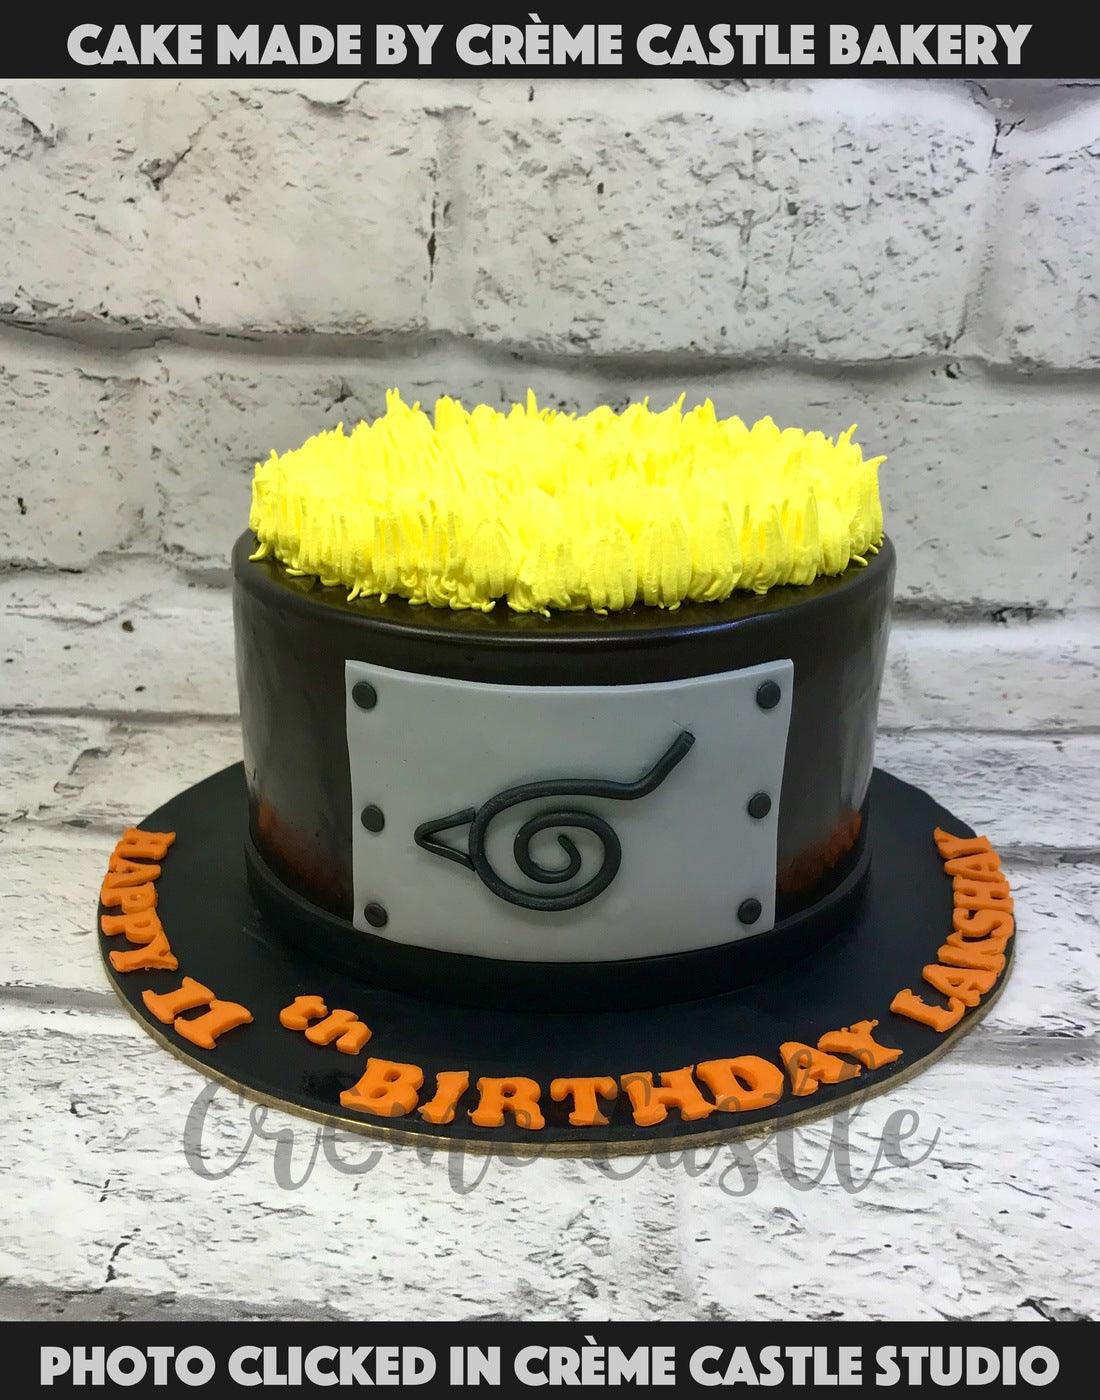 Details more than 81 anime cake images